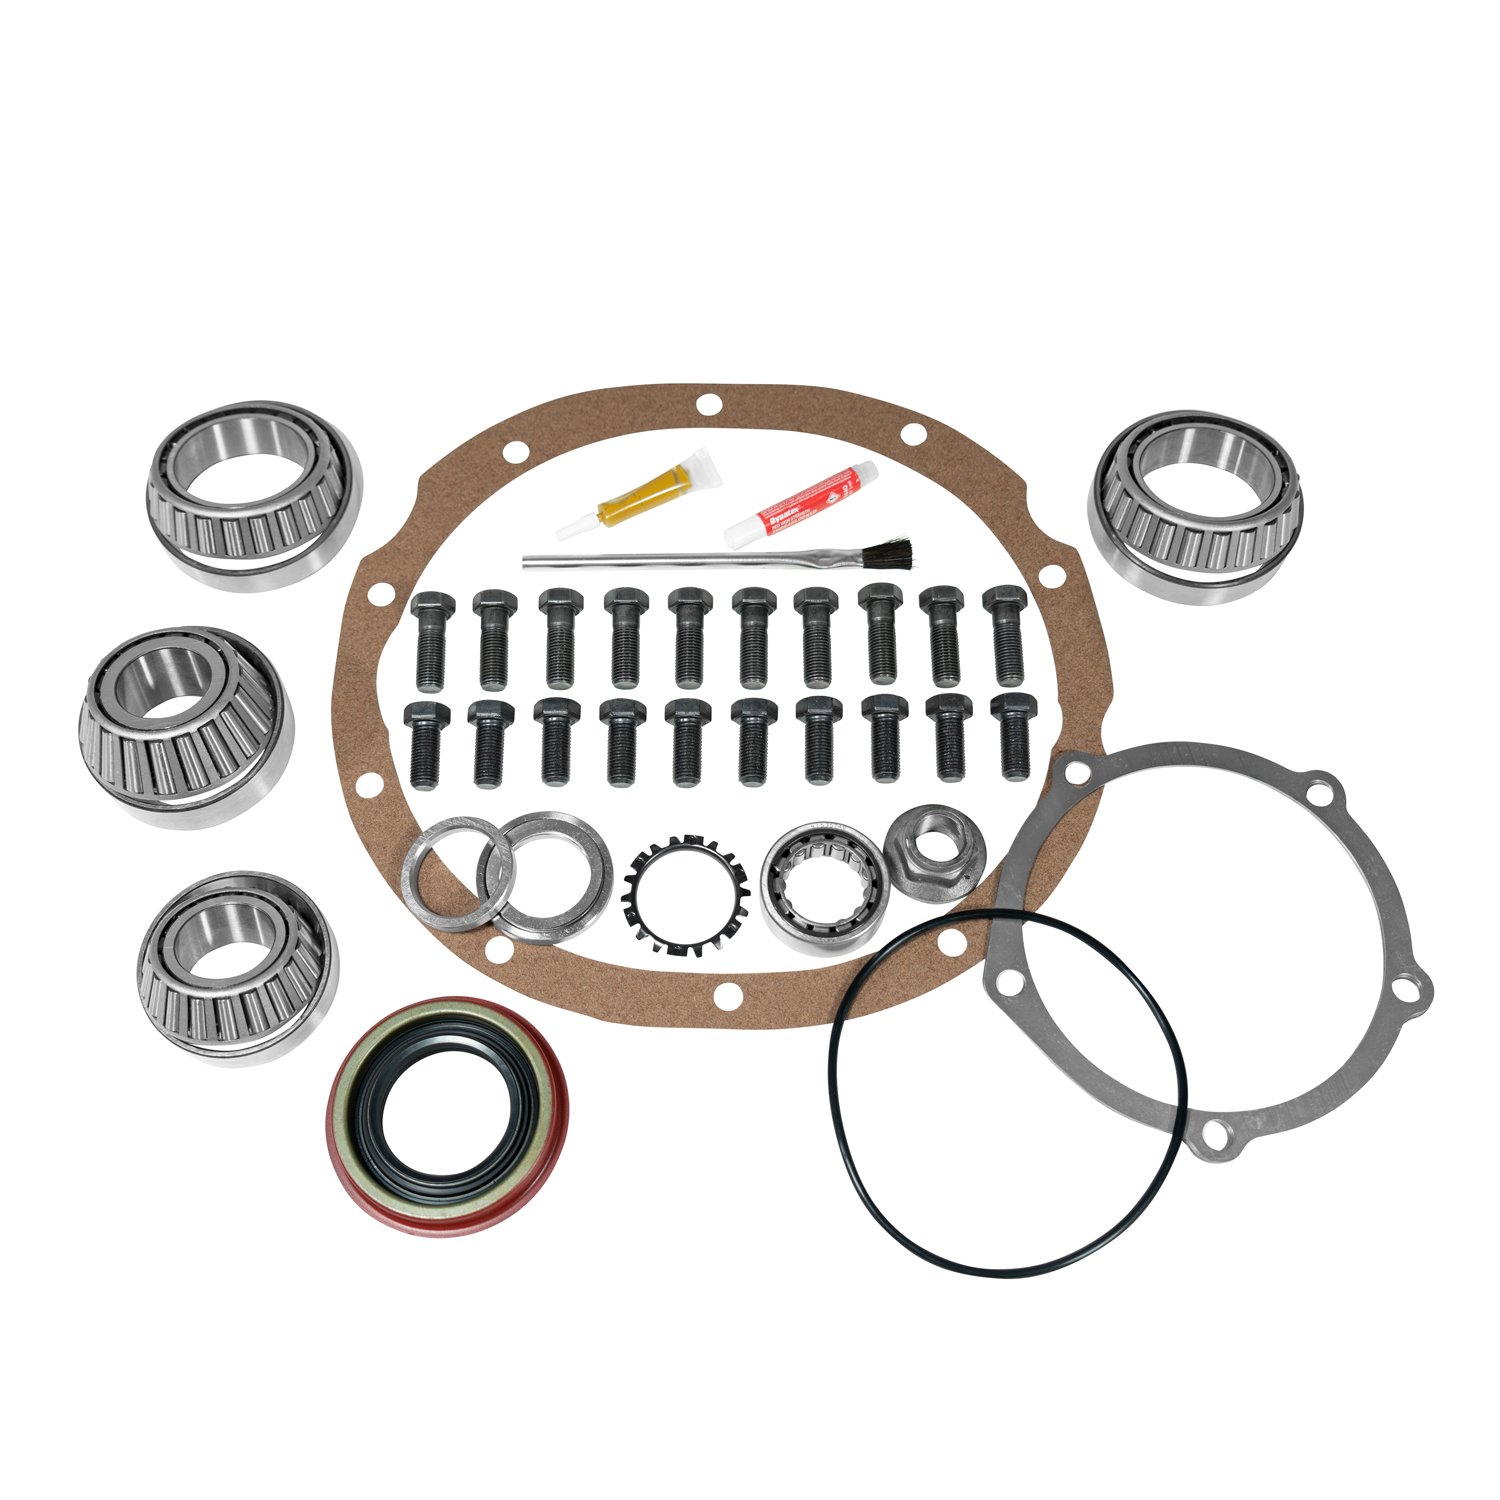 Master Overhaul Kit For Ford 9 in. Lm501310